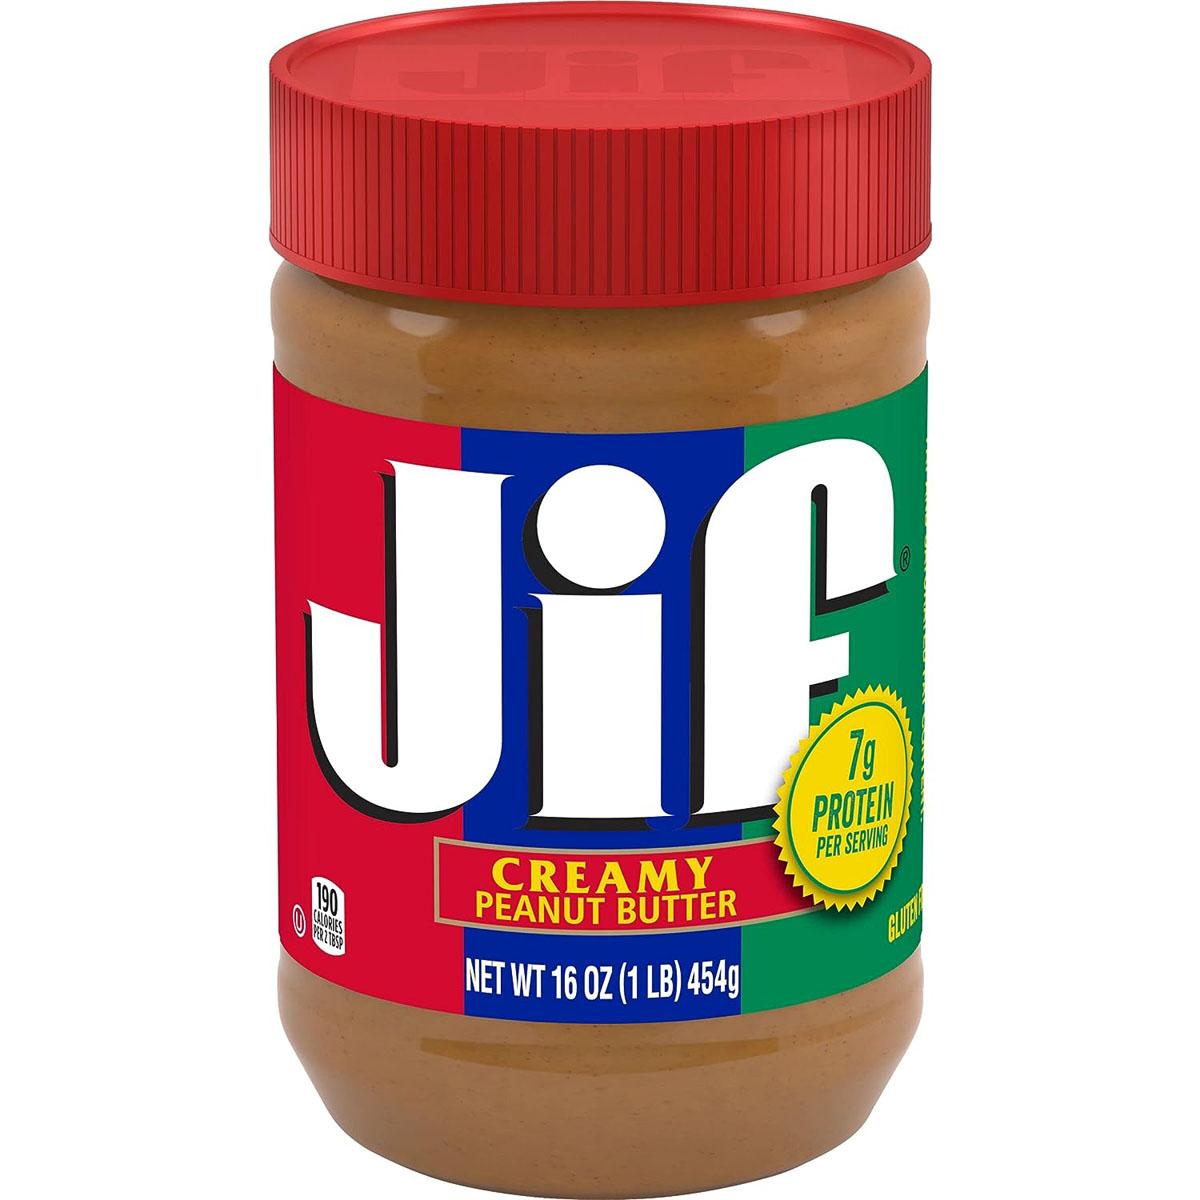 Jif Creamy Peanut Butter 6 Pack for $13.10 Shipped